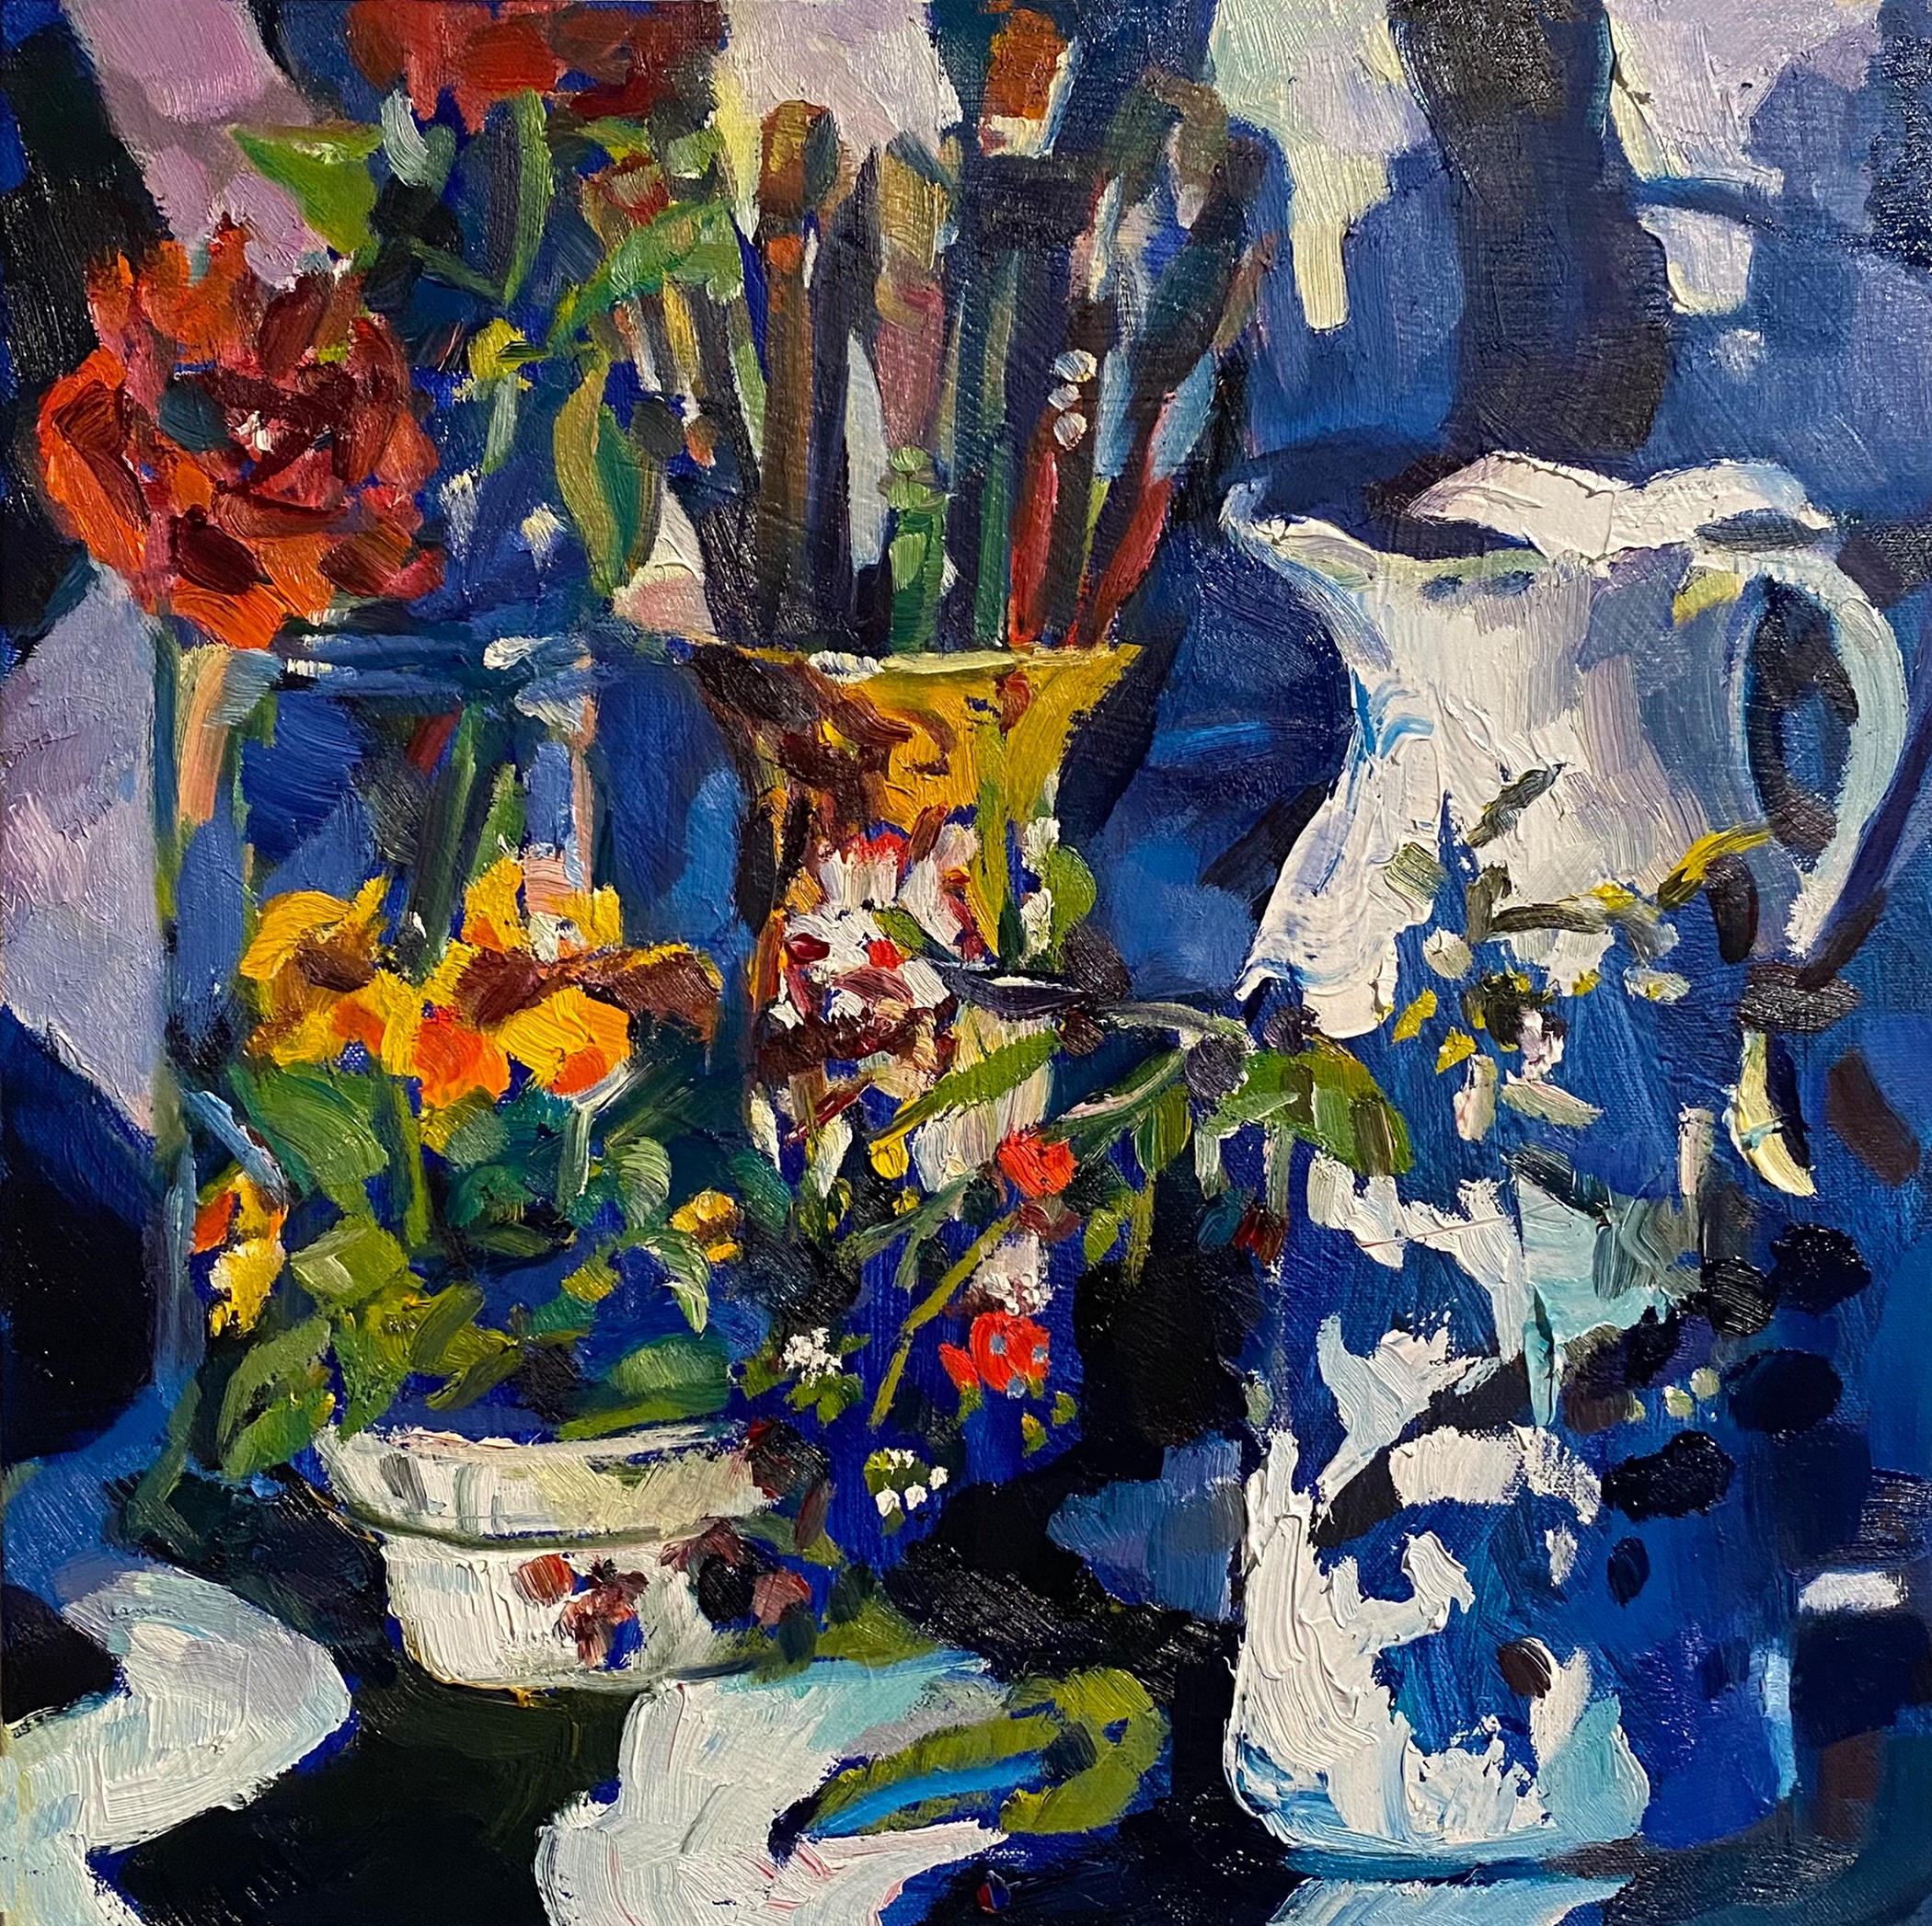 Rosemary Valadon 'The Tall White Jug' oil on canvas 40 x 40cm $4,800